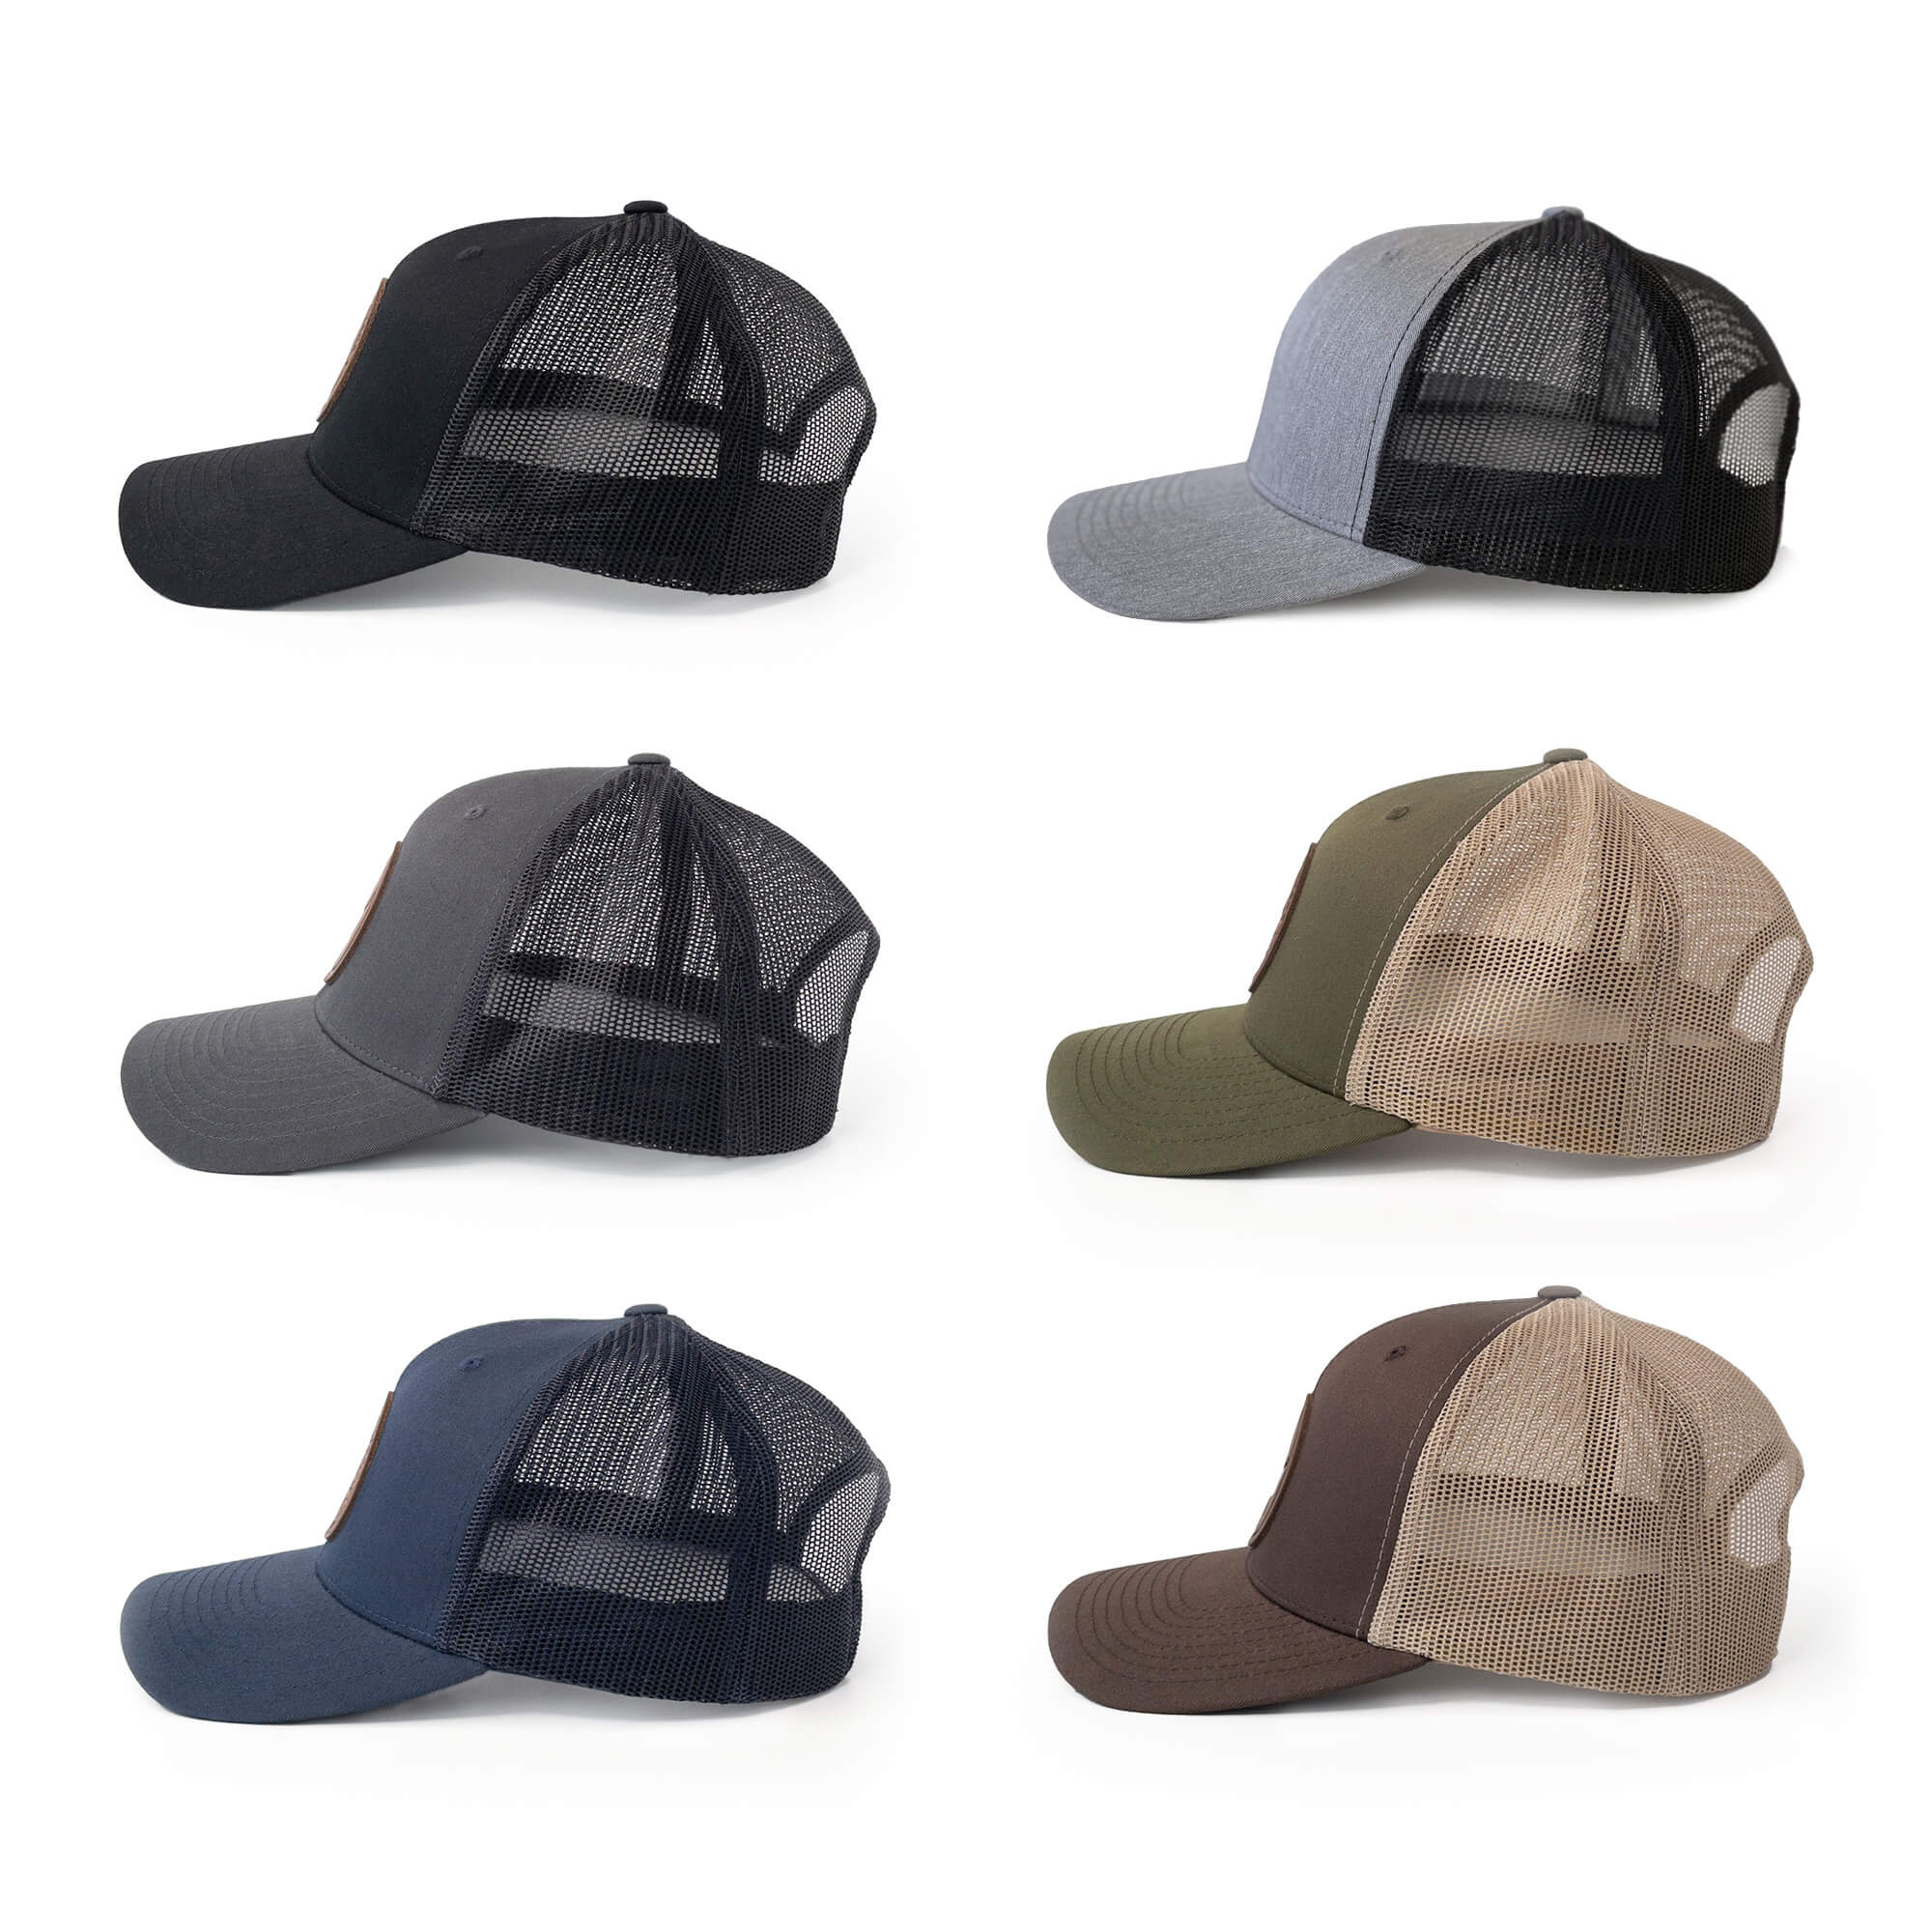 Leather patch trucker hats available in 6 colors | BLACK-002-007, CHARC-002-007, NAVY-002-007, HGREY-002-007, MOSS-002-007, BROWN-002-007